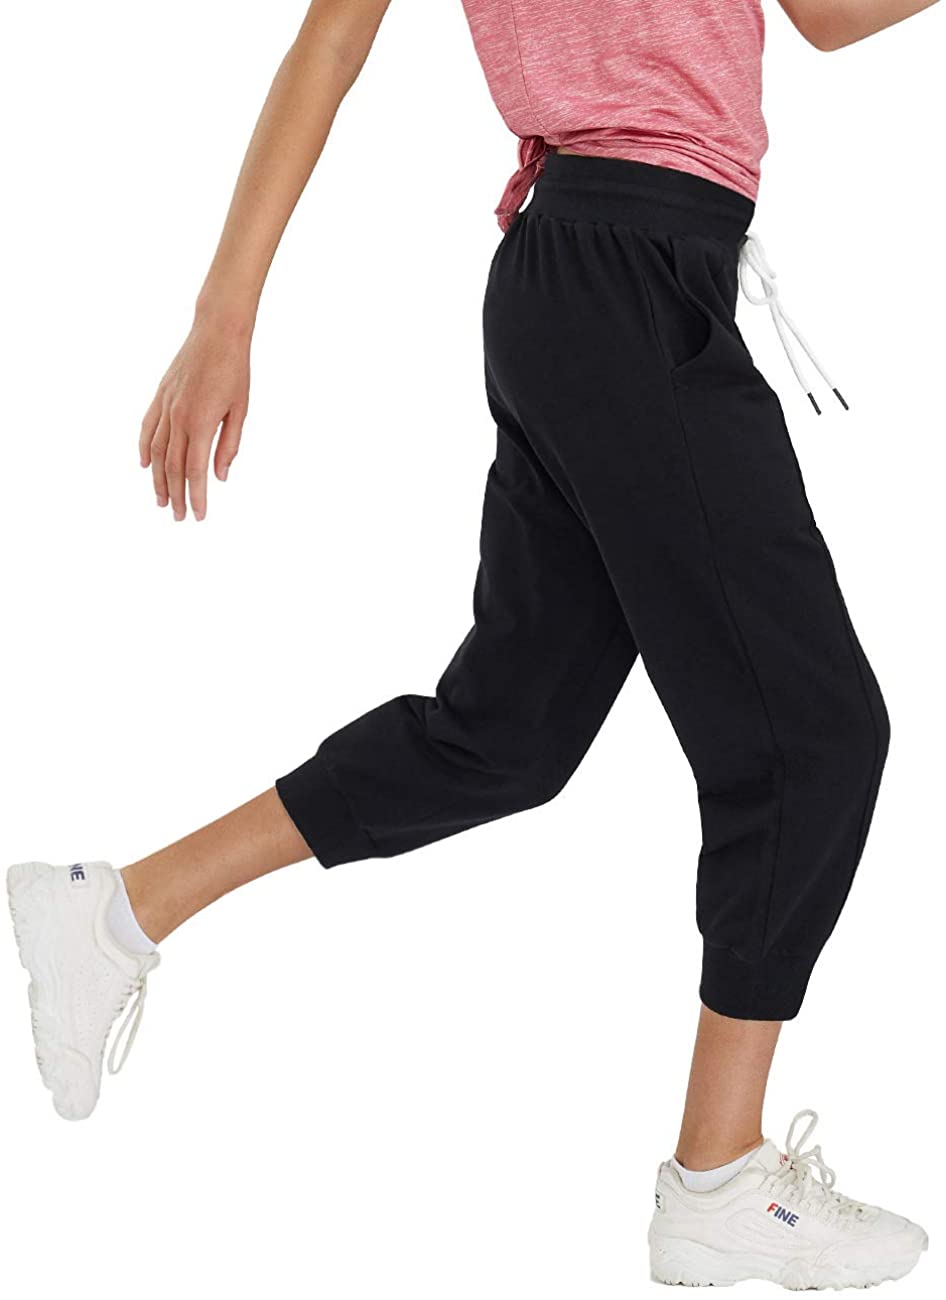 SPECIALMAGIC Sports Capri for Women Sweatpants Cropped Yoga Pants Running Joggers for Gym Daily